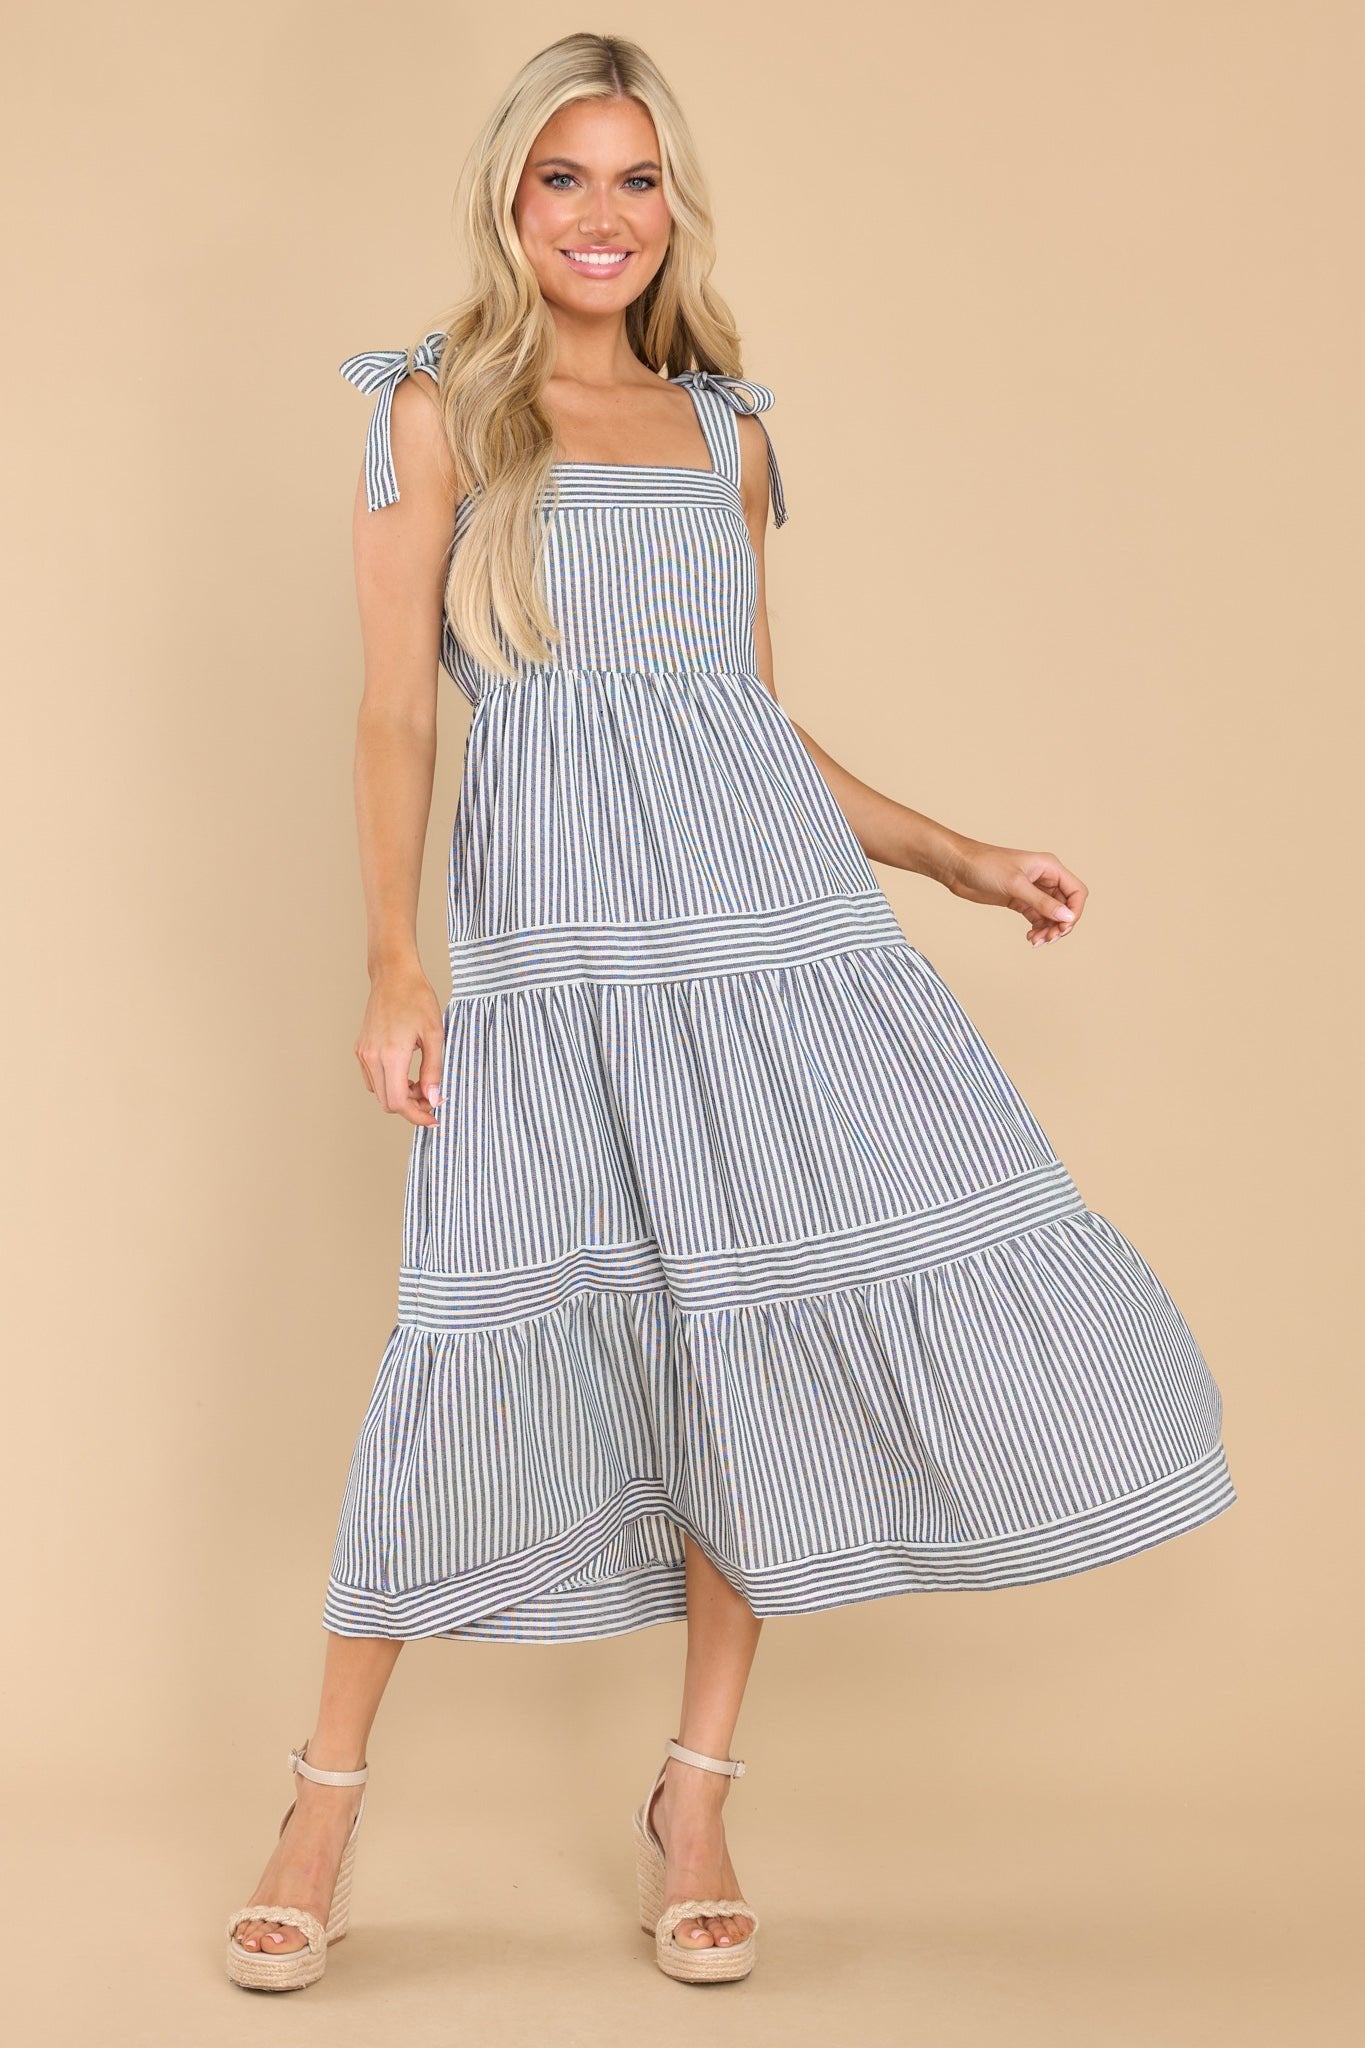 At The Orchard Navy Stripe Maxi Dress - Red Dress